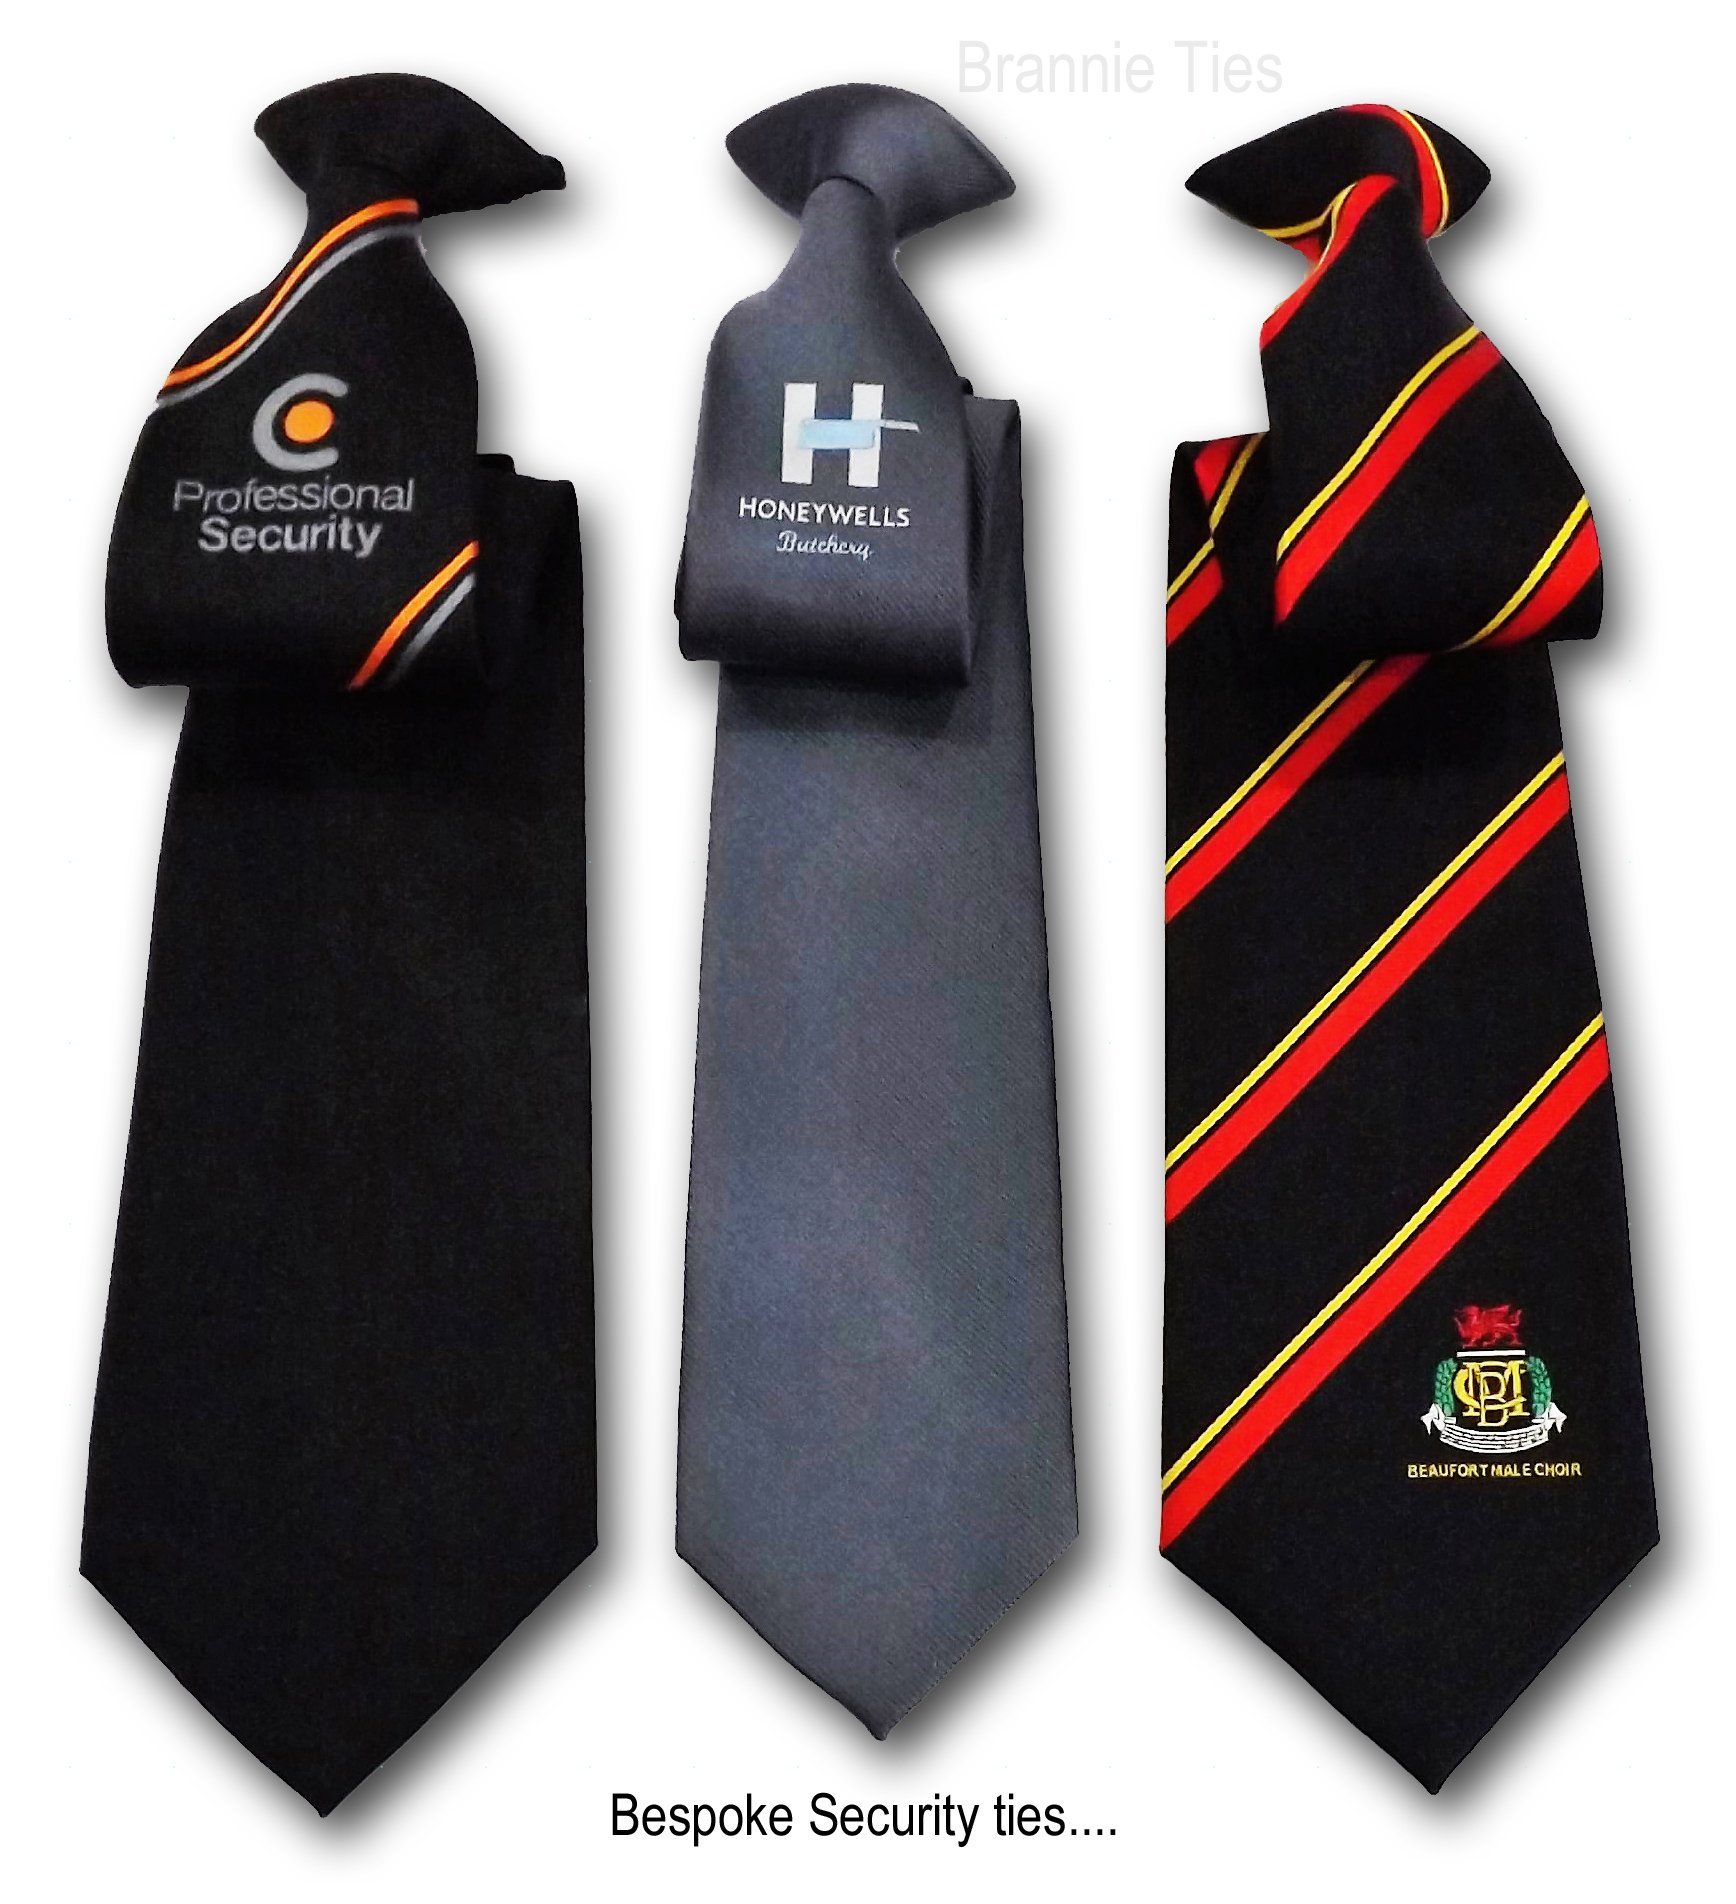 Club, corporate and security ties